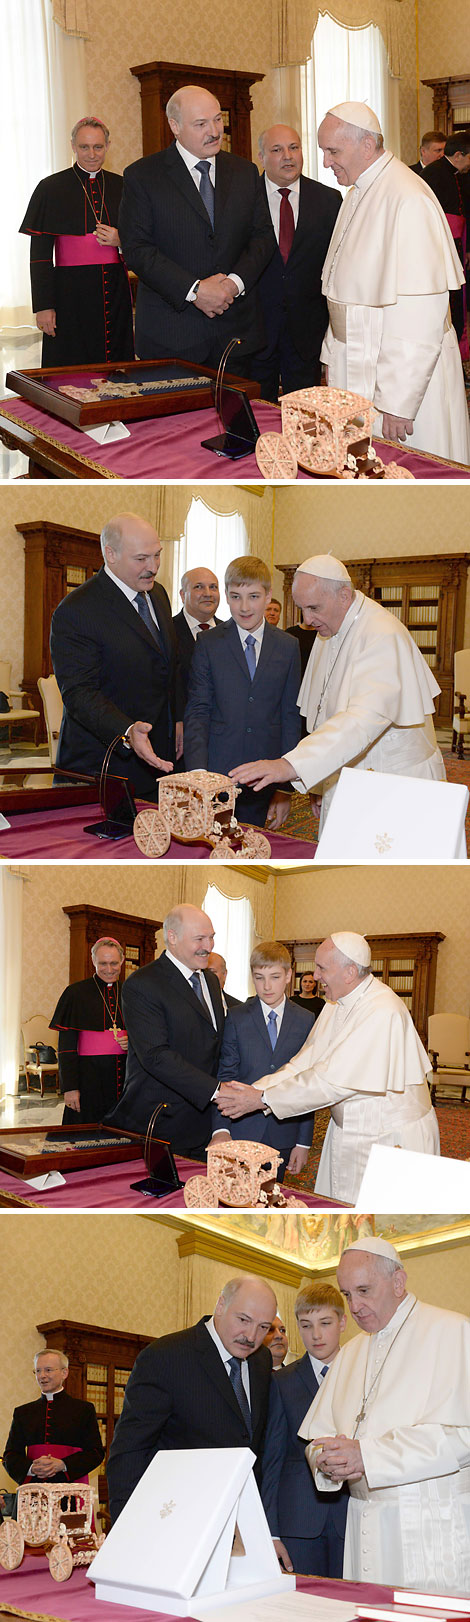 The President of Belarus and the Pope of Rome exchanged presents